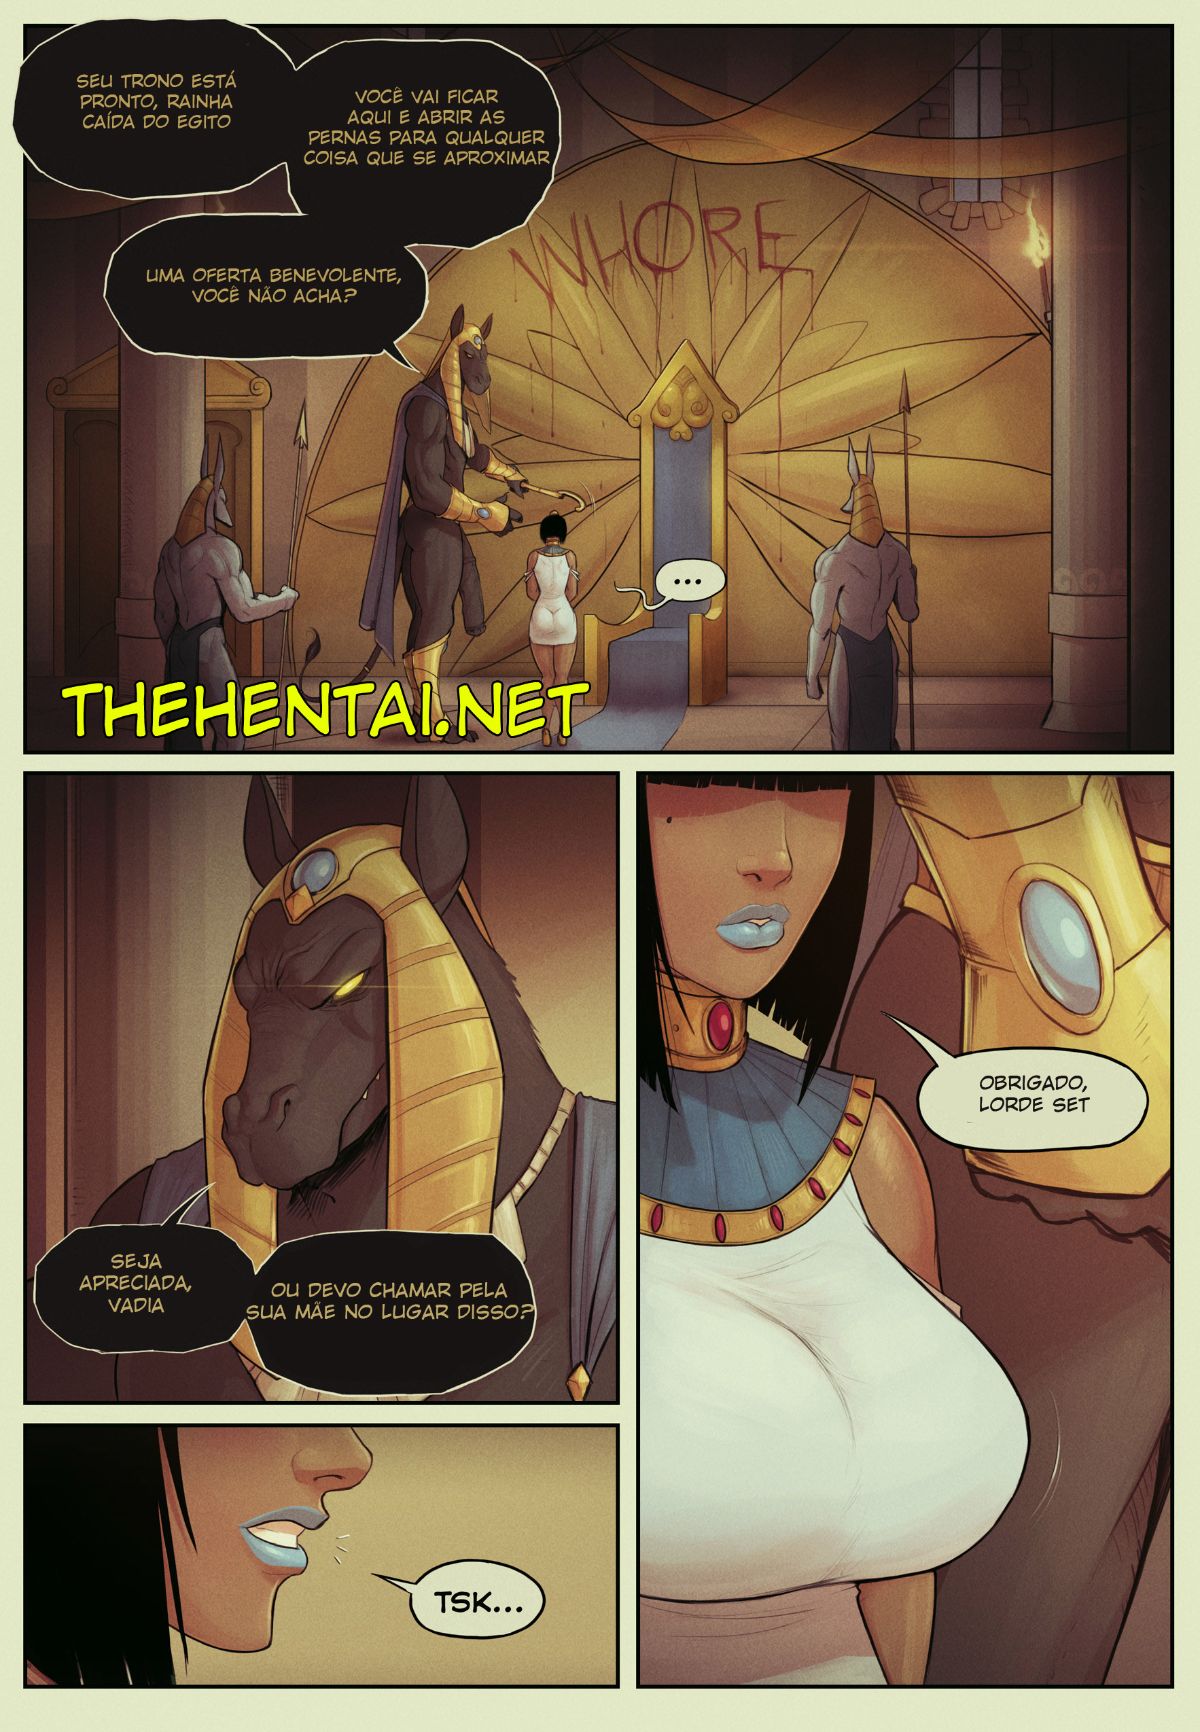 In the Shadow of Anubis 3 Ch 1 Hentai pt-br 10